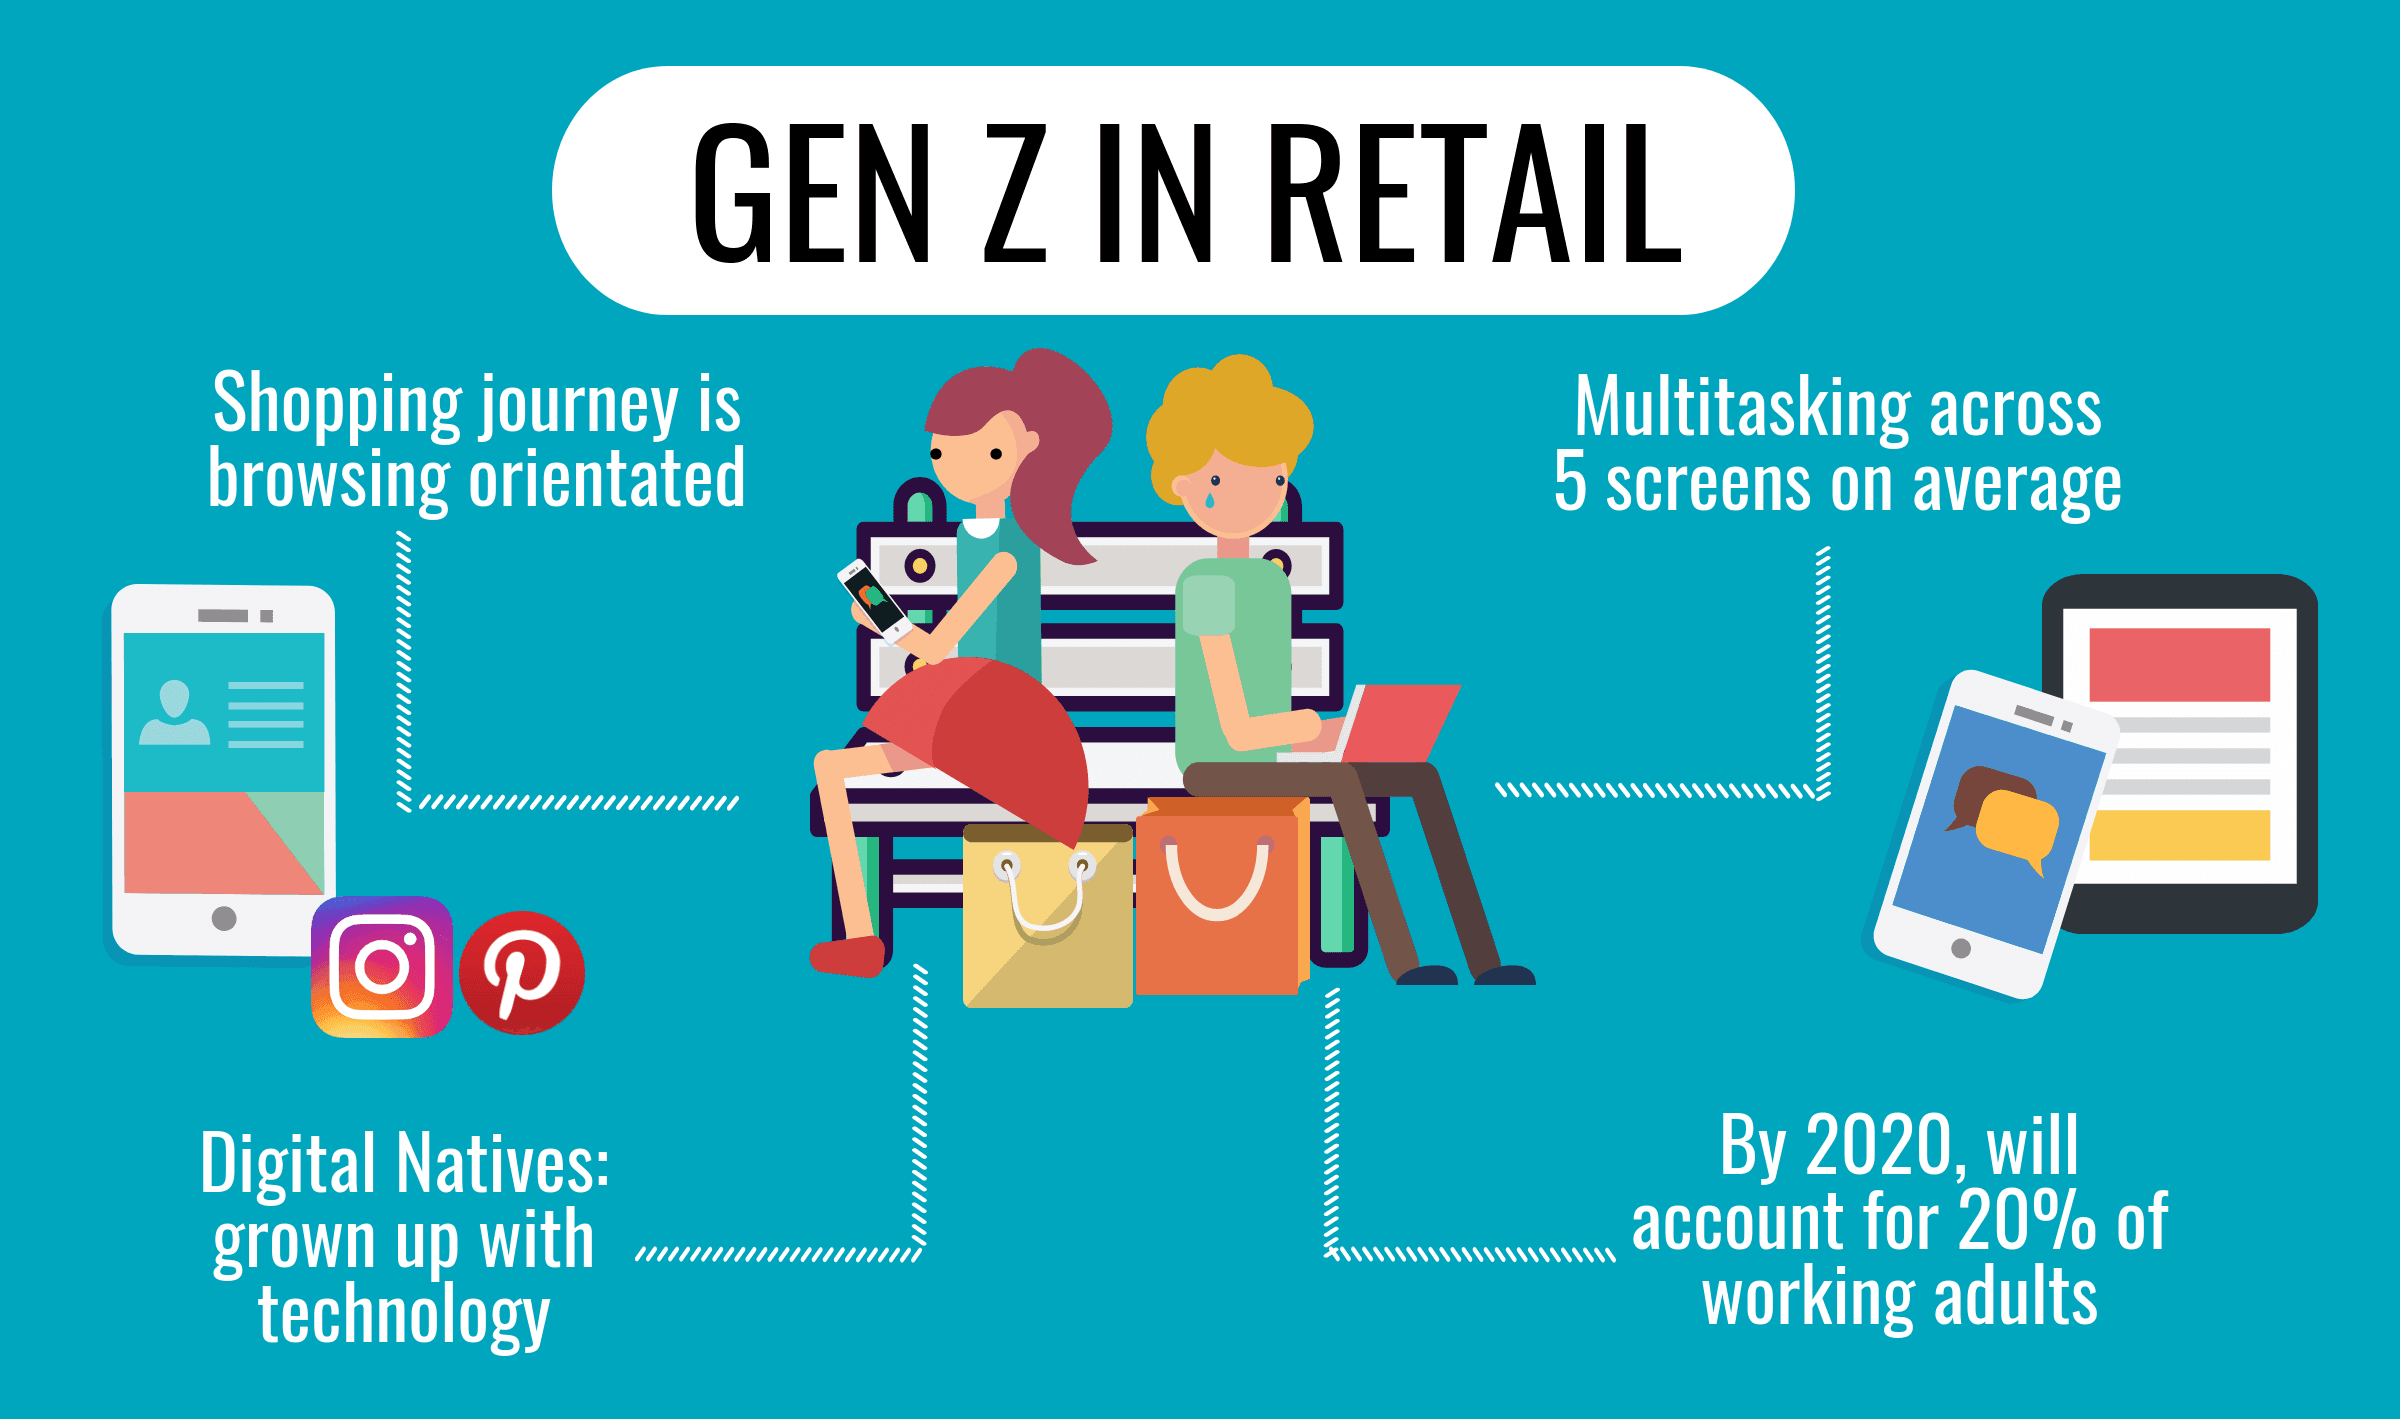 Given Gen Z’s dependence on the Internet, it’s fitting that merely being online is no barrier when it comes to earning their trust as consumers.